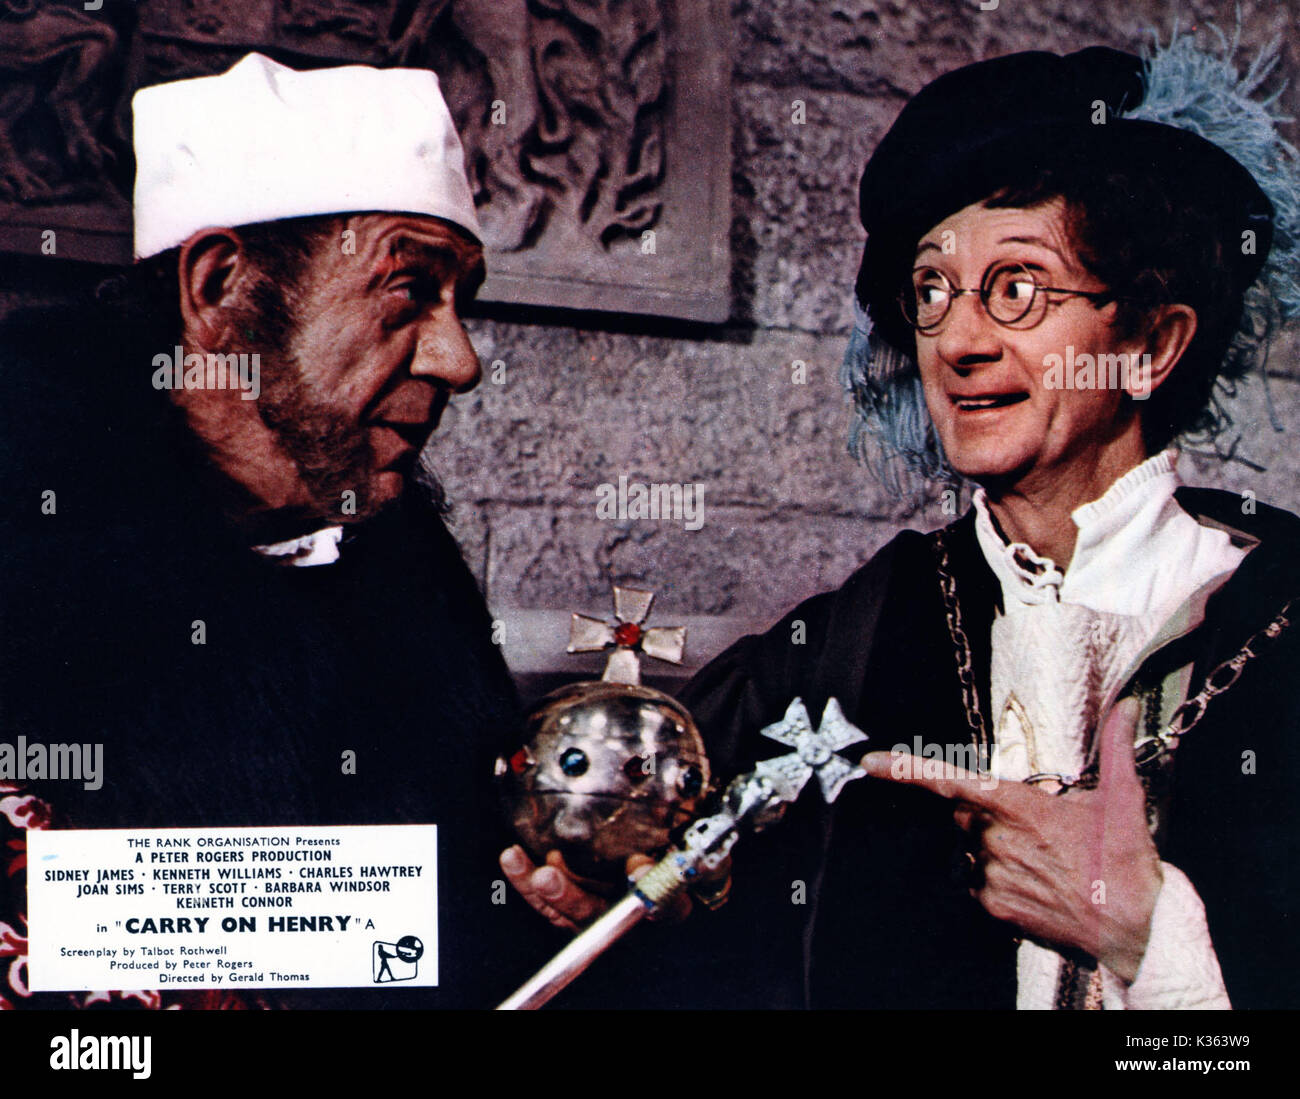 CARRY ON HENRY CHARLES HAWTREY, SID JAMES     Date: 1971 Stock Photo